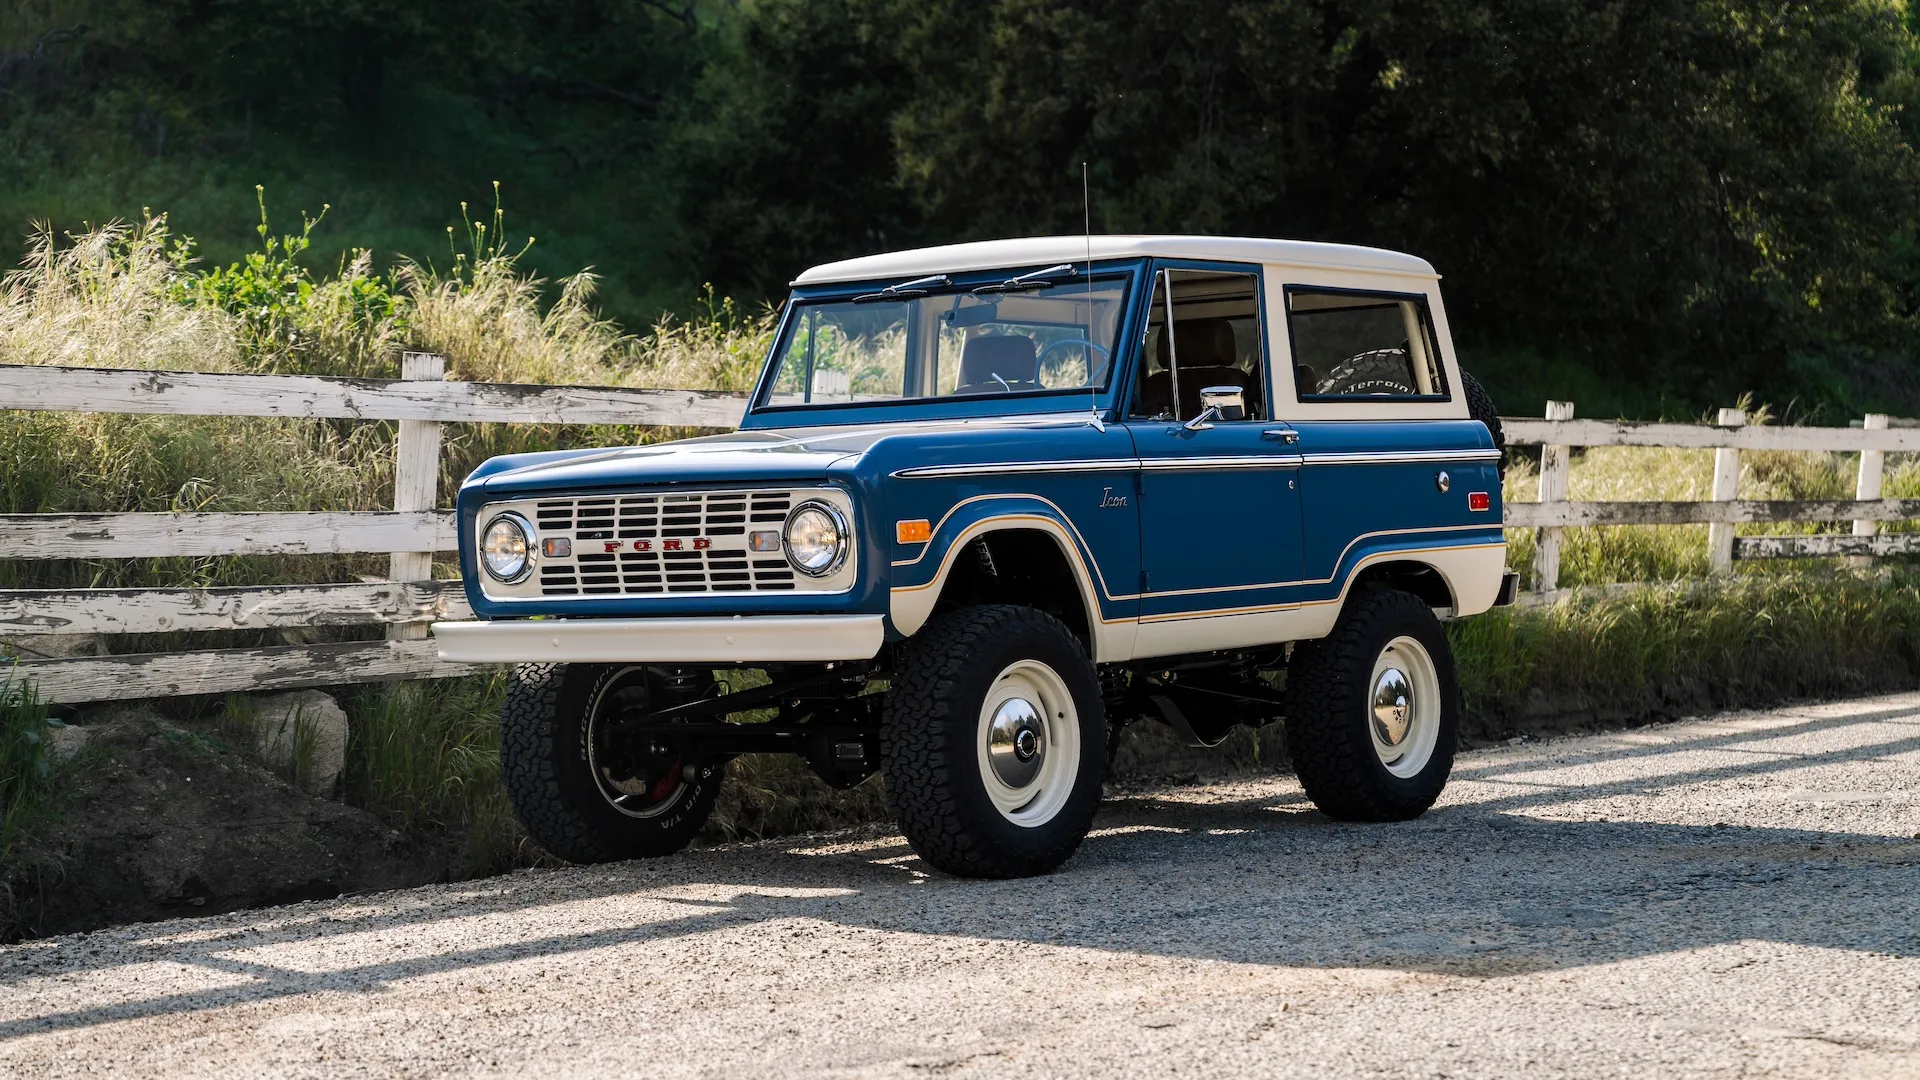 The icon new restomod is a true blue 1968 Ford Bronco